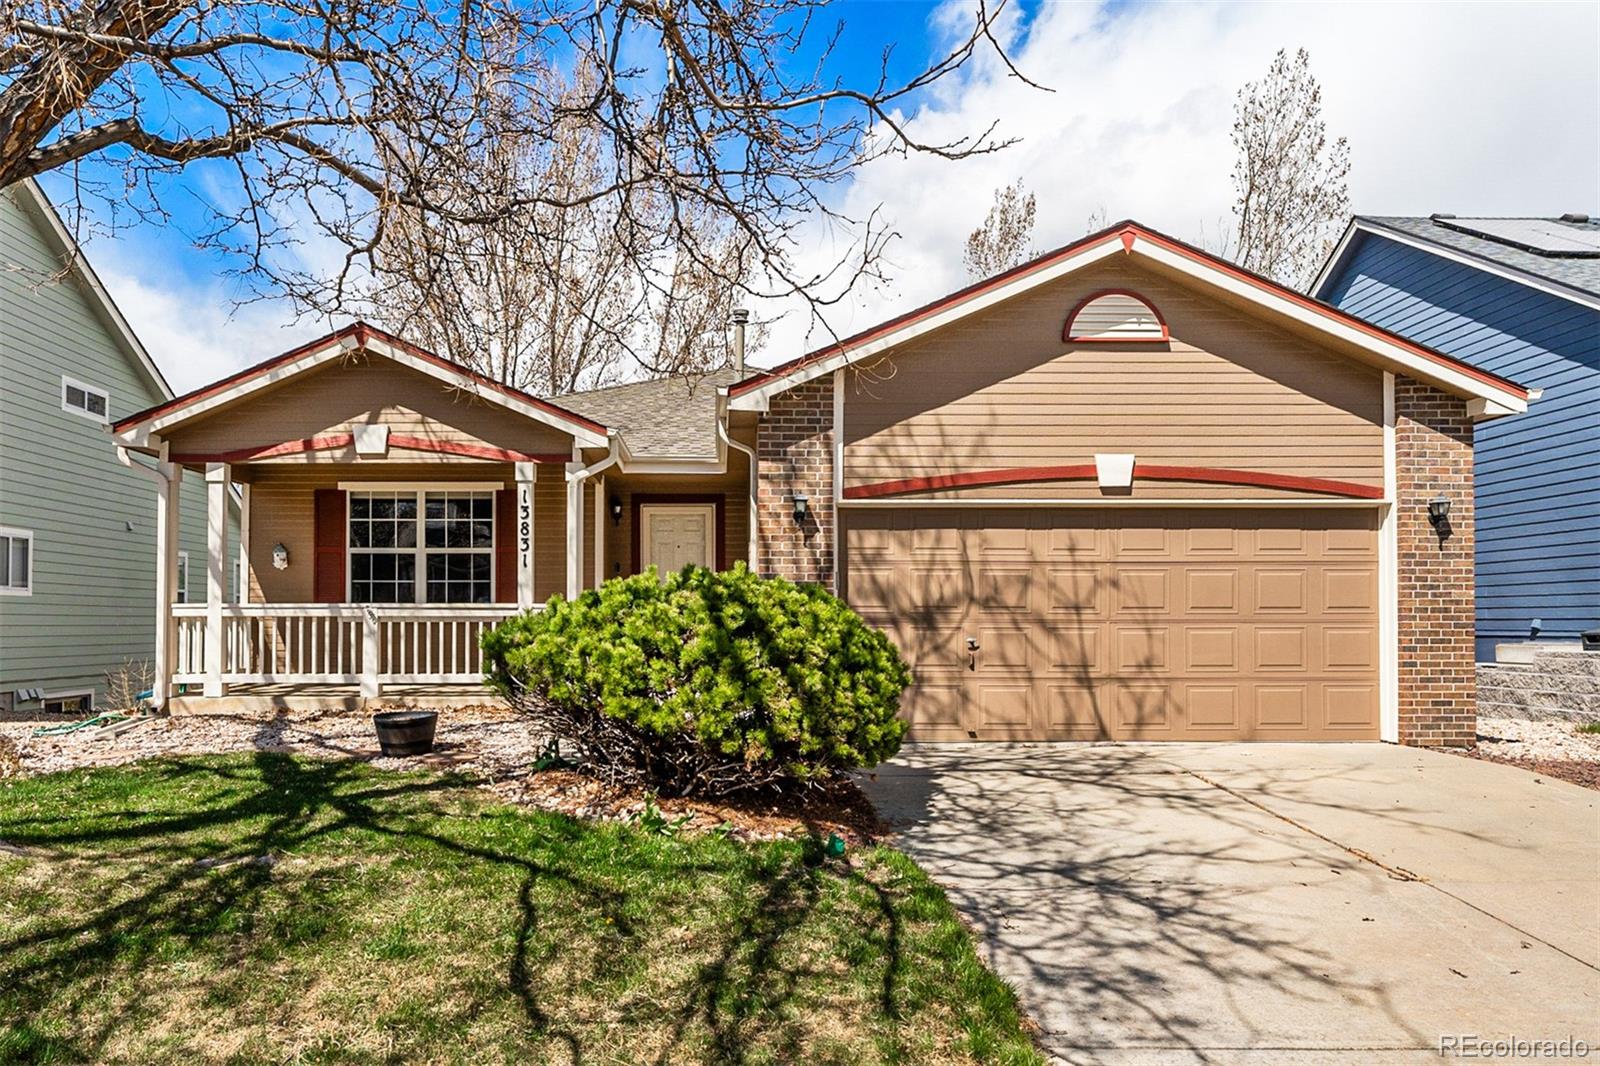 13831 W 64th Drive, arvada MLS: 5445496 Beds: 4 Baths: 3 Price: $745,000